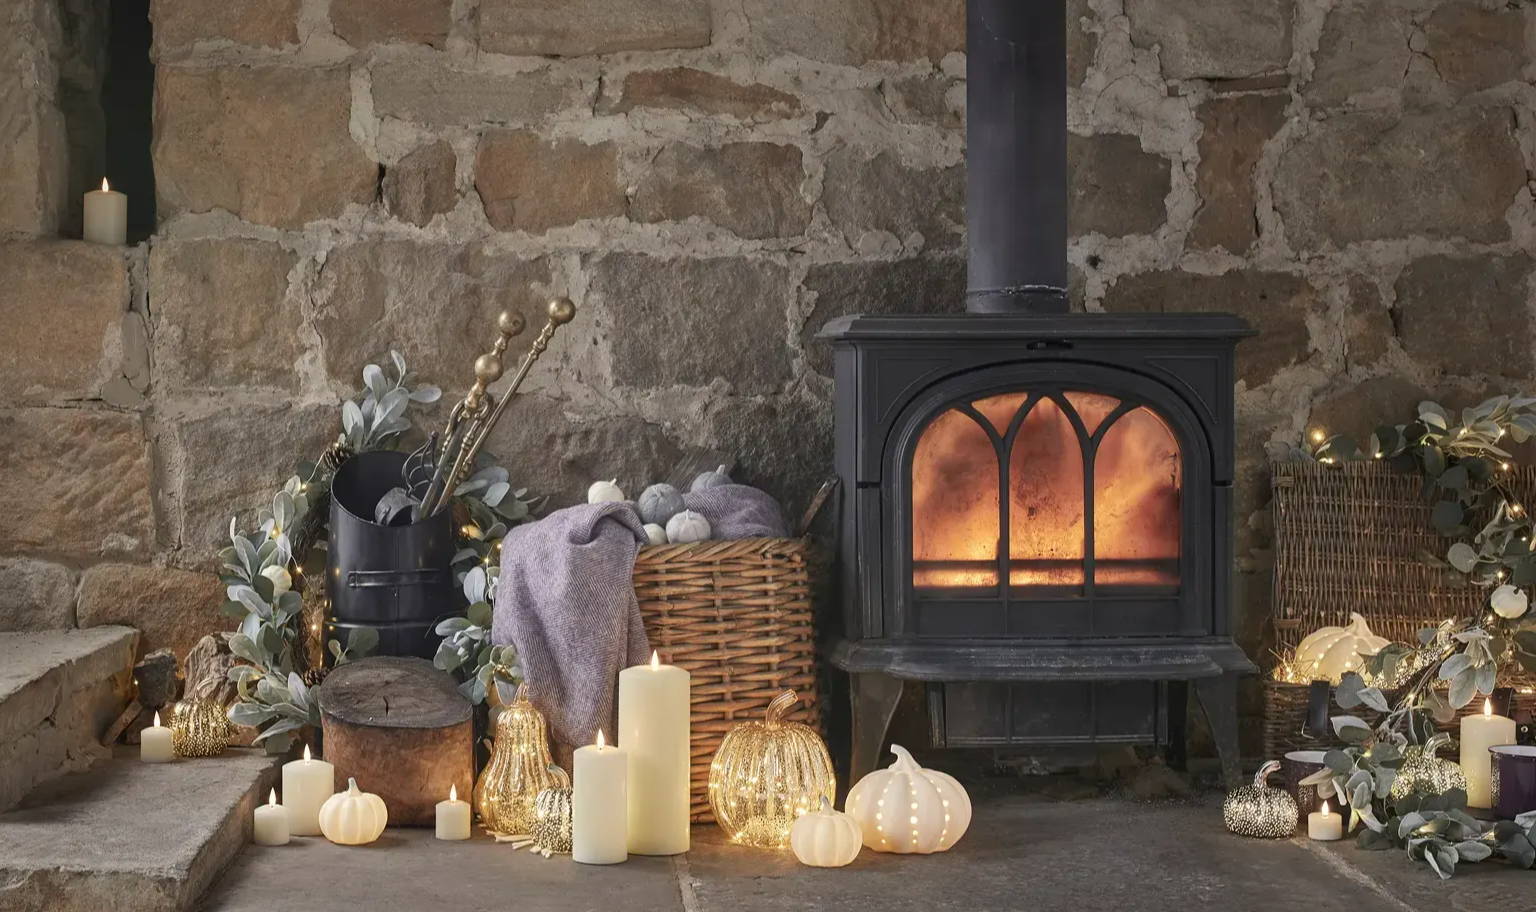 A cosy fireplace setting with pumpkins and LED candles.